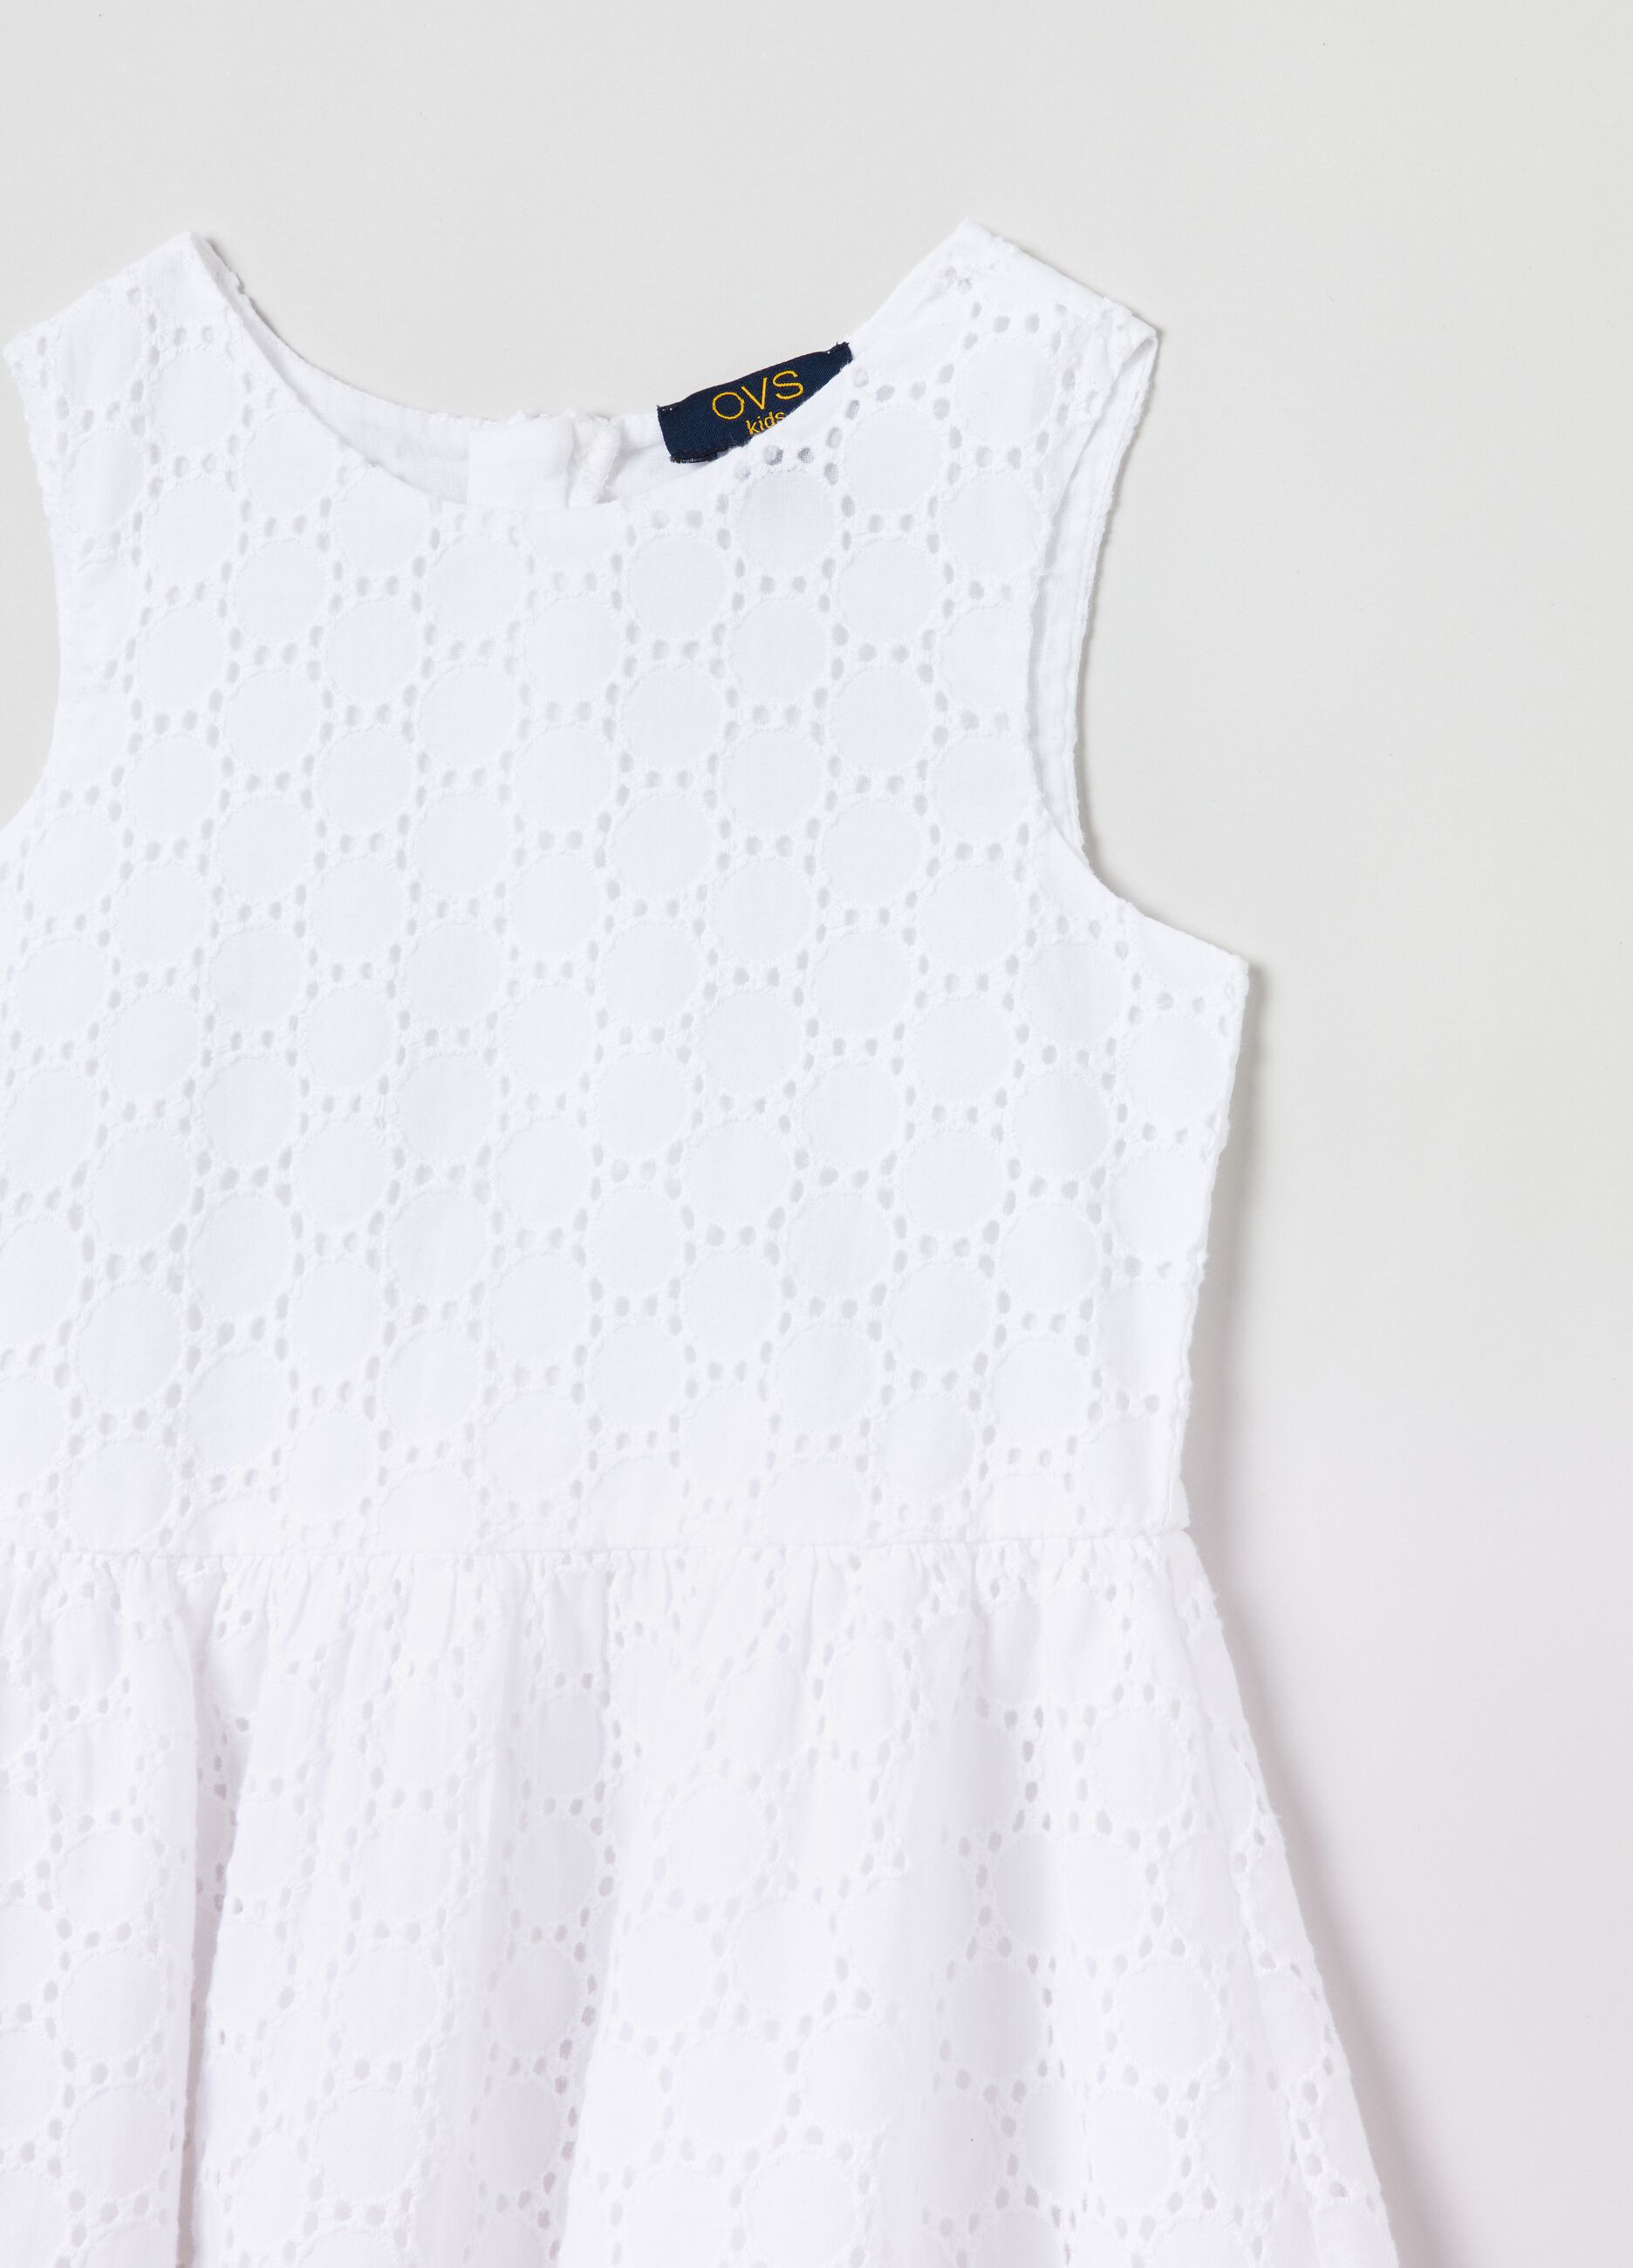 Sleeveless dress in broderie anglaise cotton